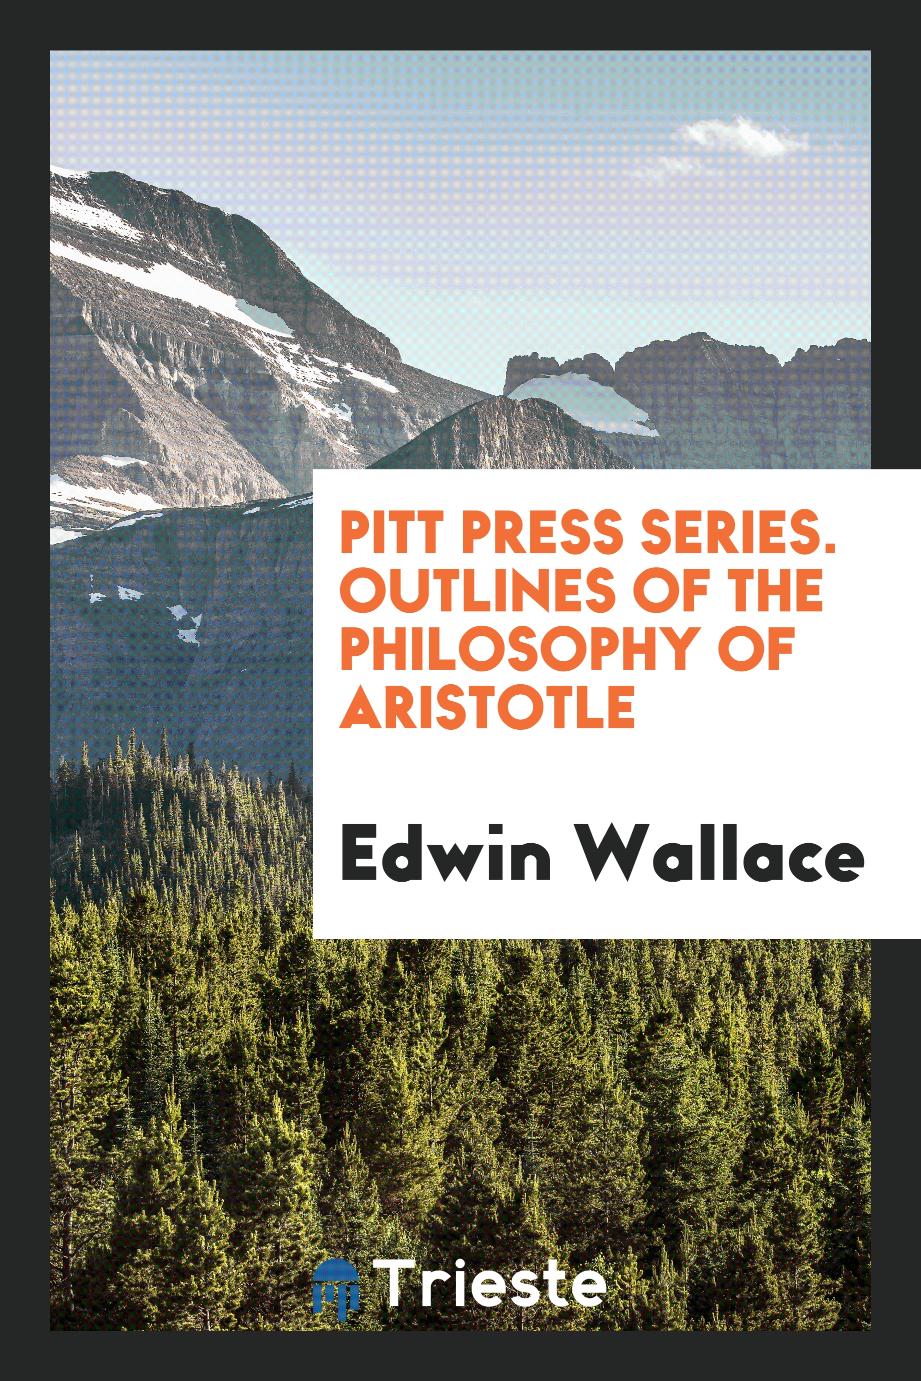 Pitt Press Series. Outlines of the Philosophy of Aristotle